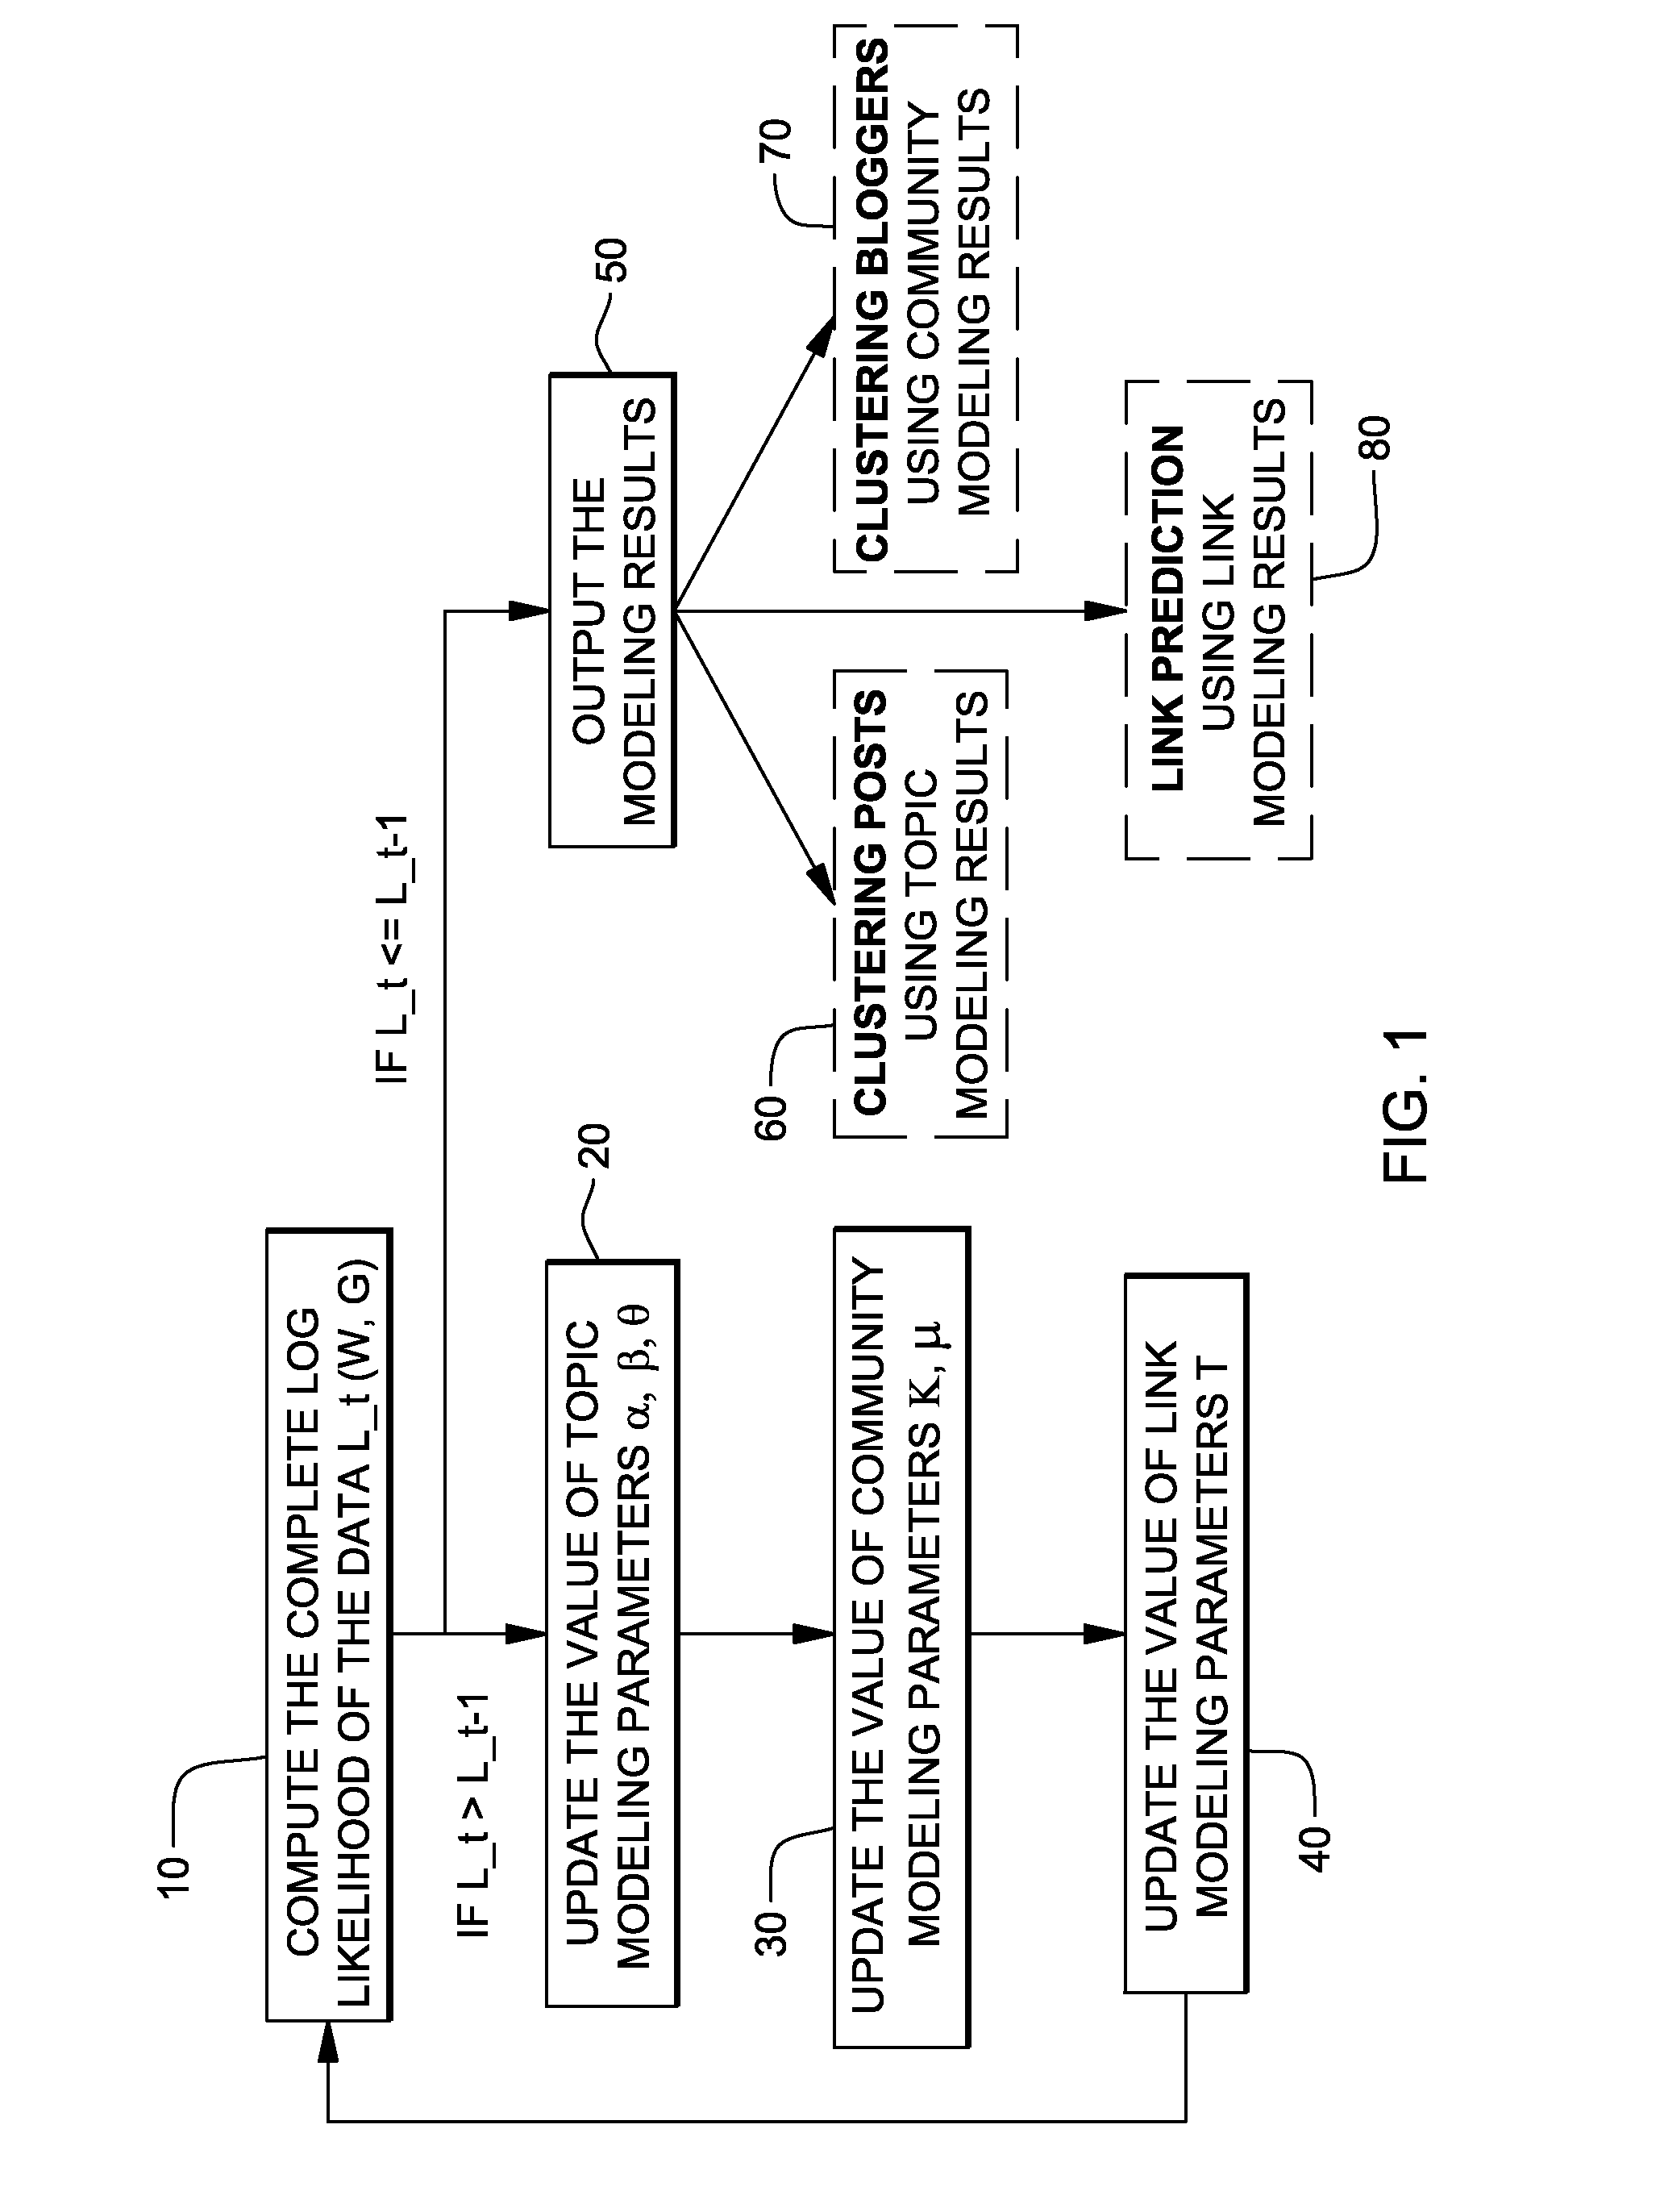 Systems and methods for extracting patterns from graph and unstructured data